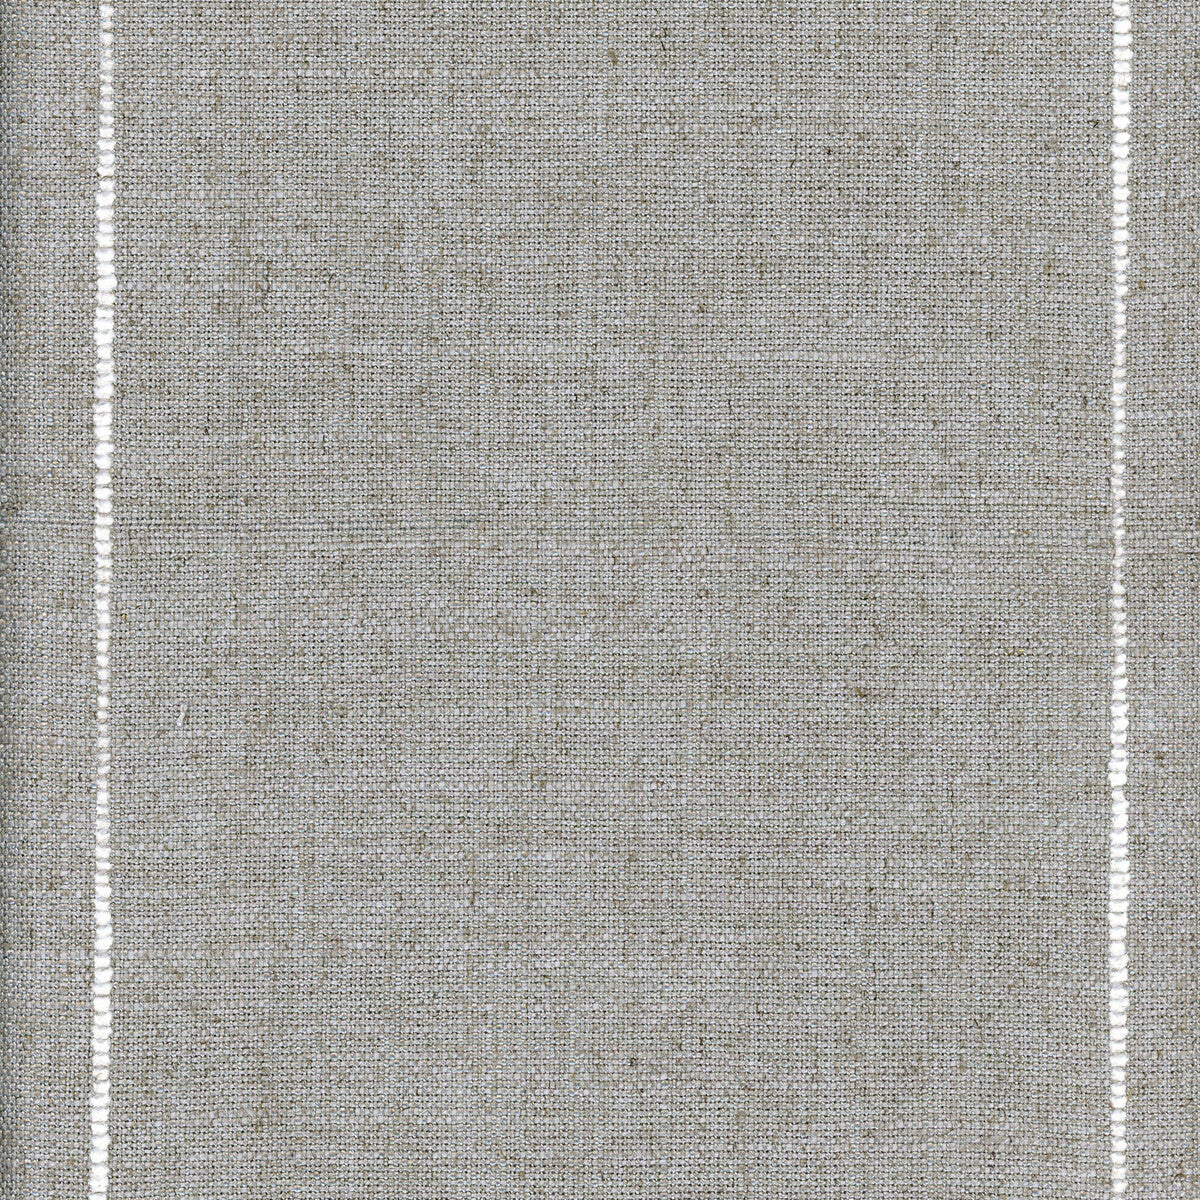 Selvaggio fabric in pebble color - pattern AM100328.11.0 - by Kravet Couture in the Andrew Martin Salento collection